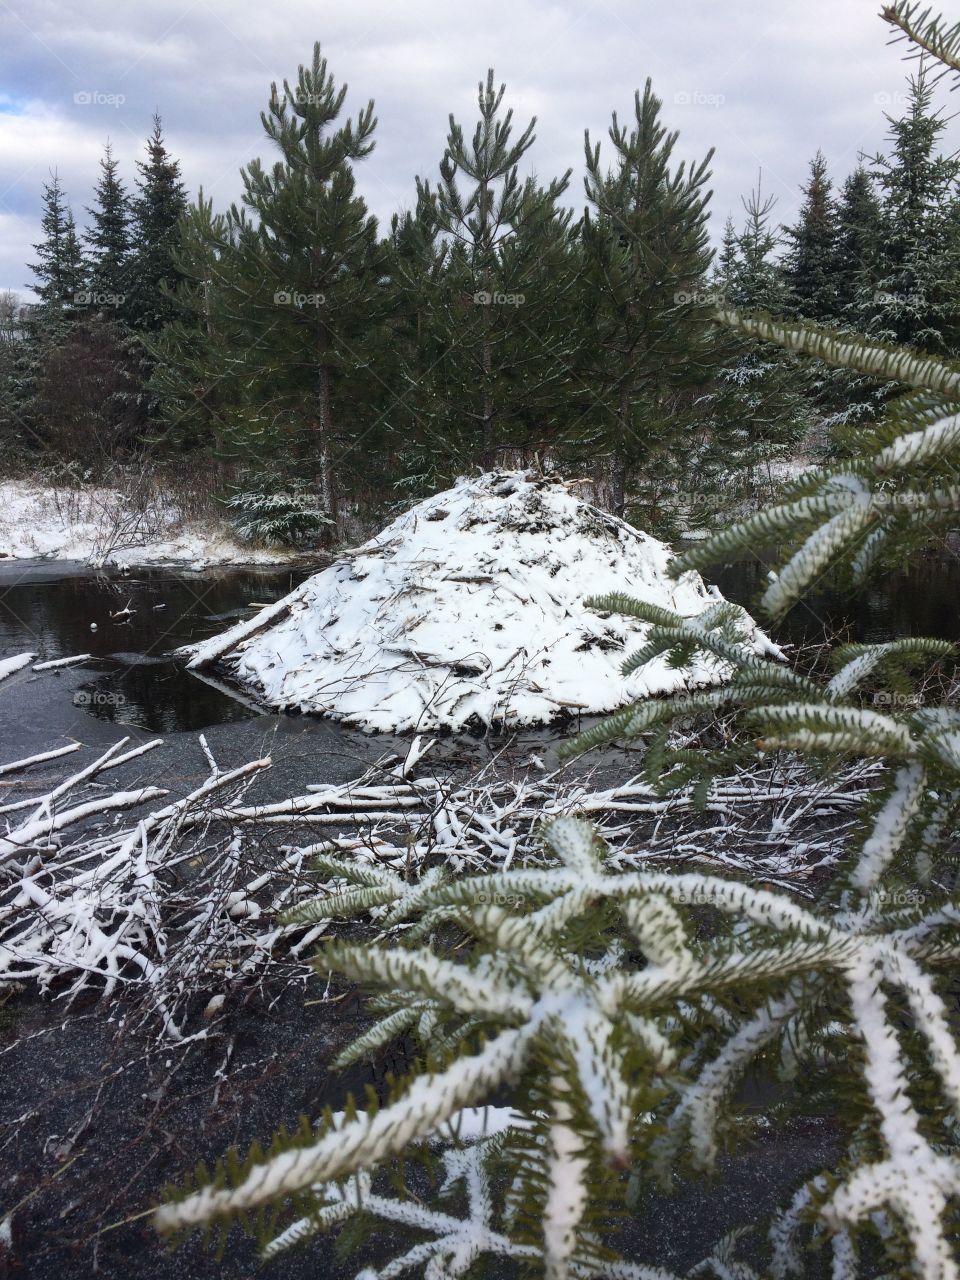 Beaver lodge in the wilderness after the first snow fall 